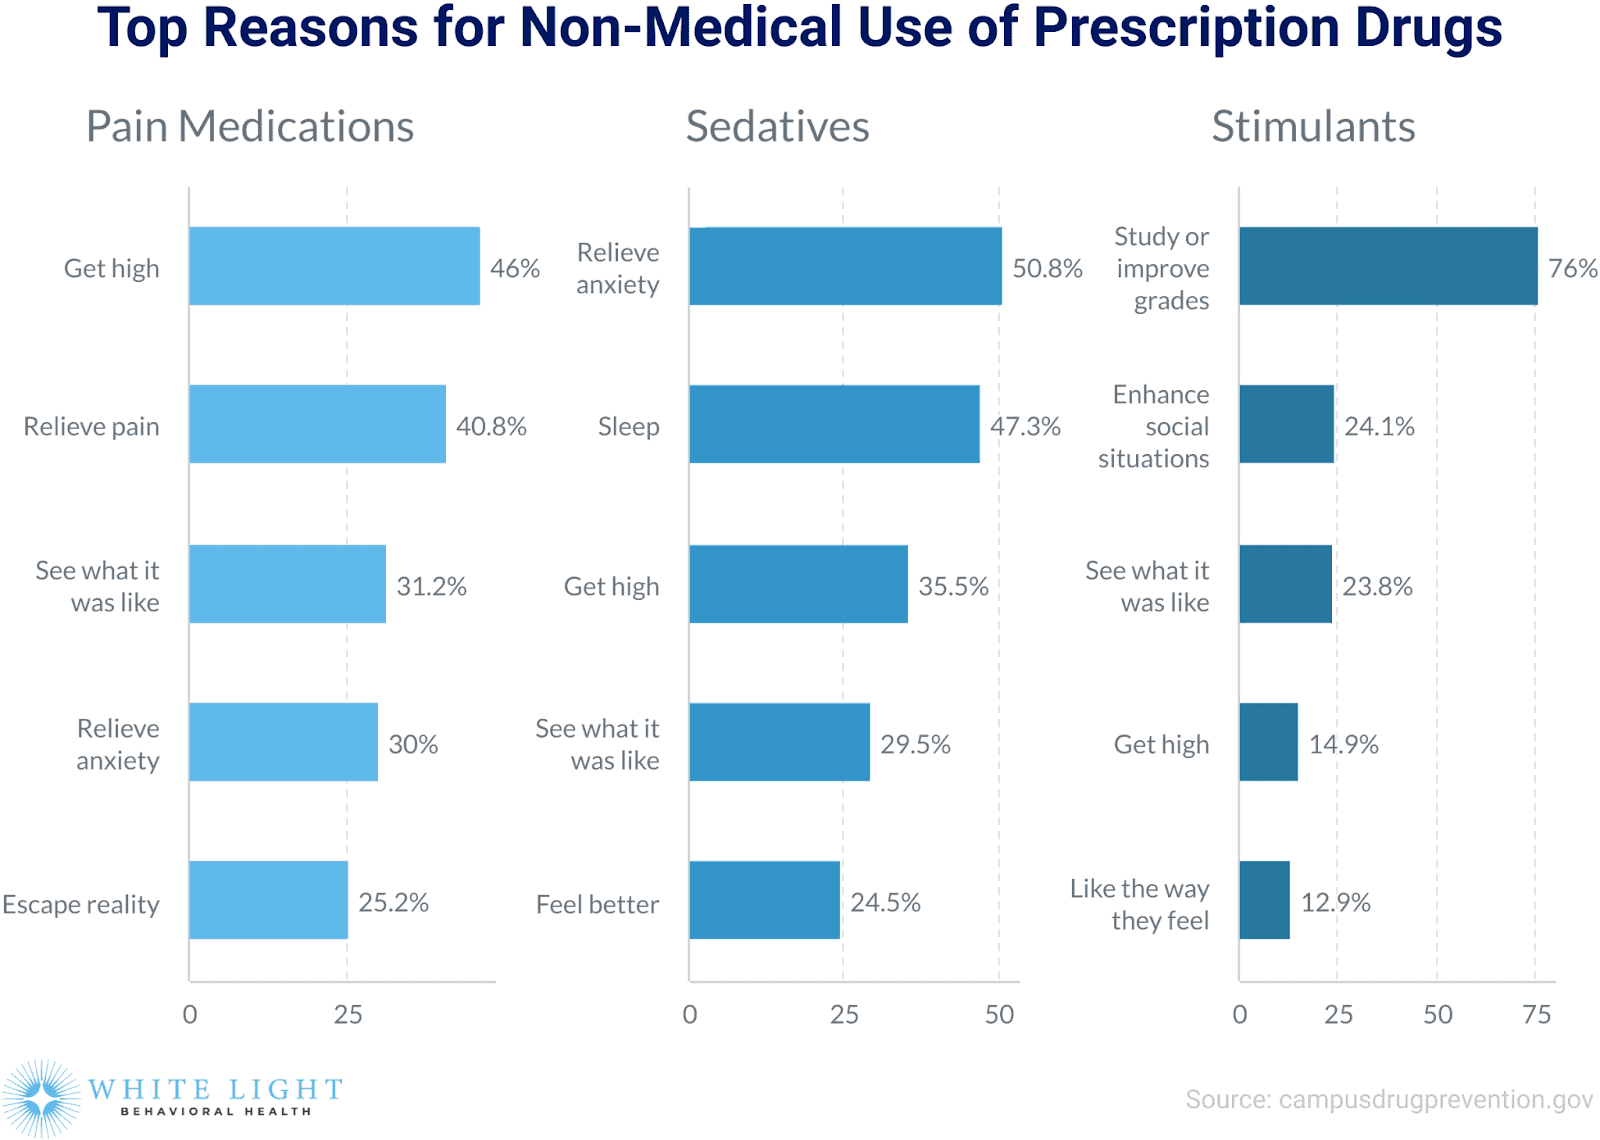 Top Reasons for Non-Medical Use of Prescription Drugs